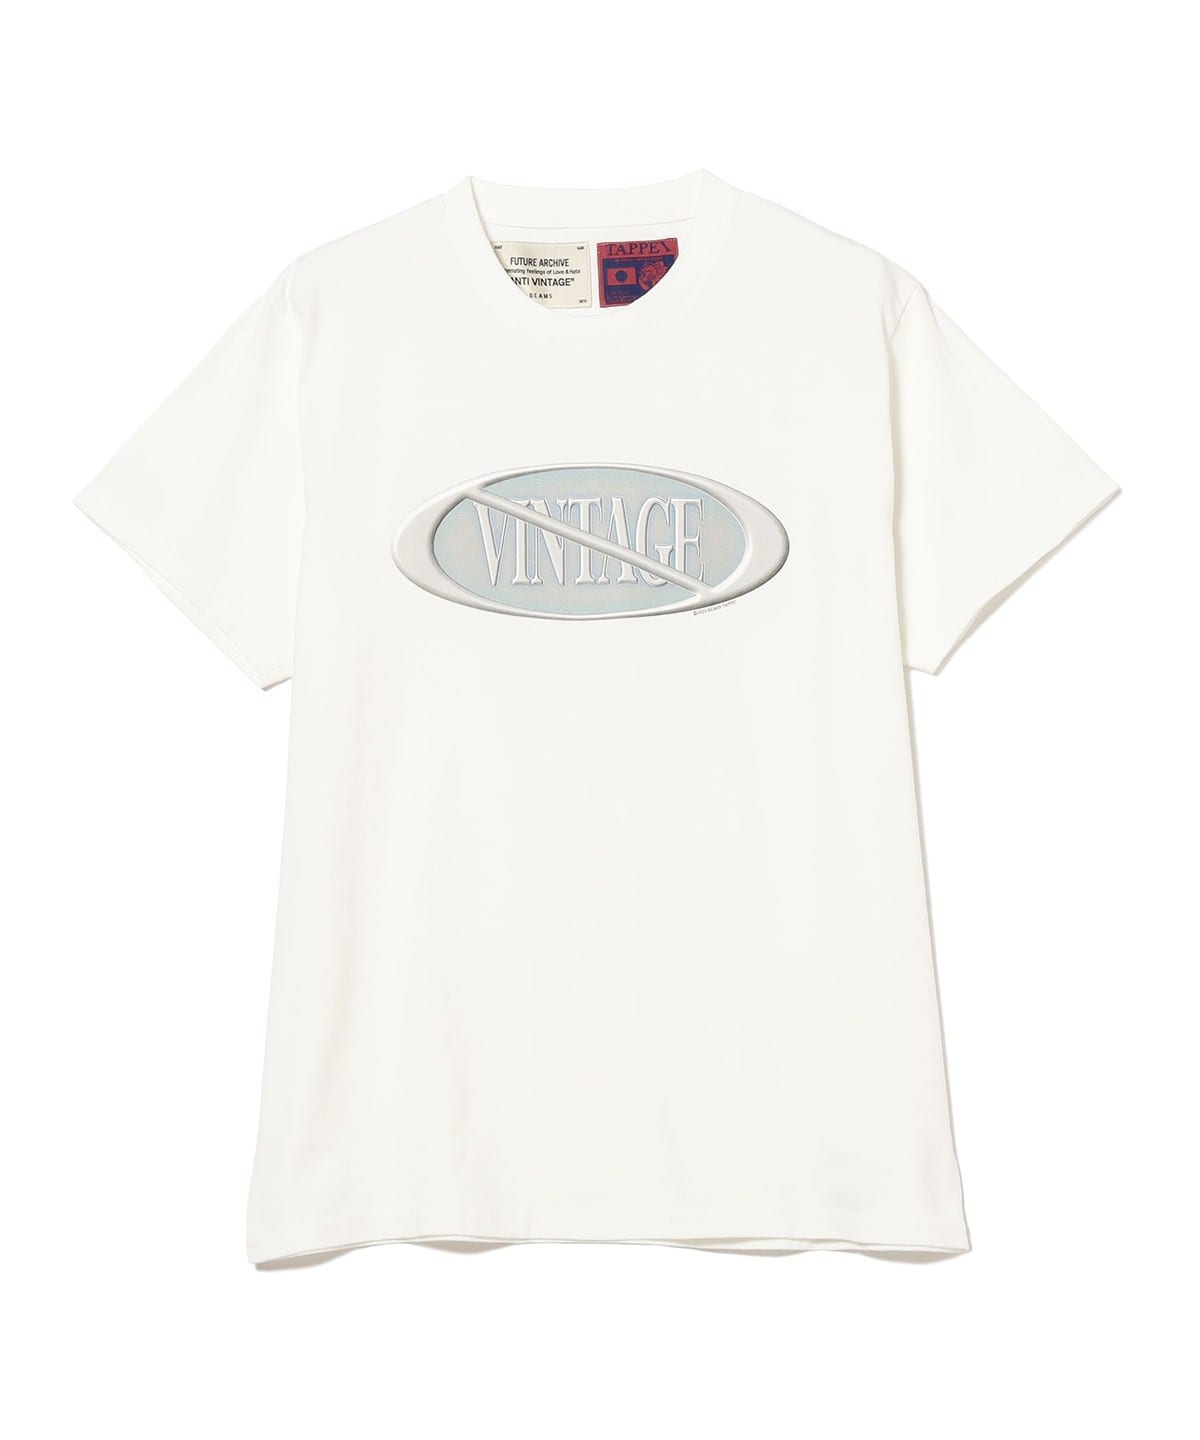 archive FLY BEAMS プリントTシャツ